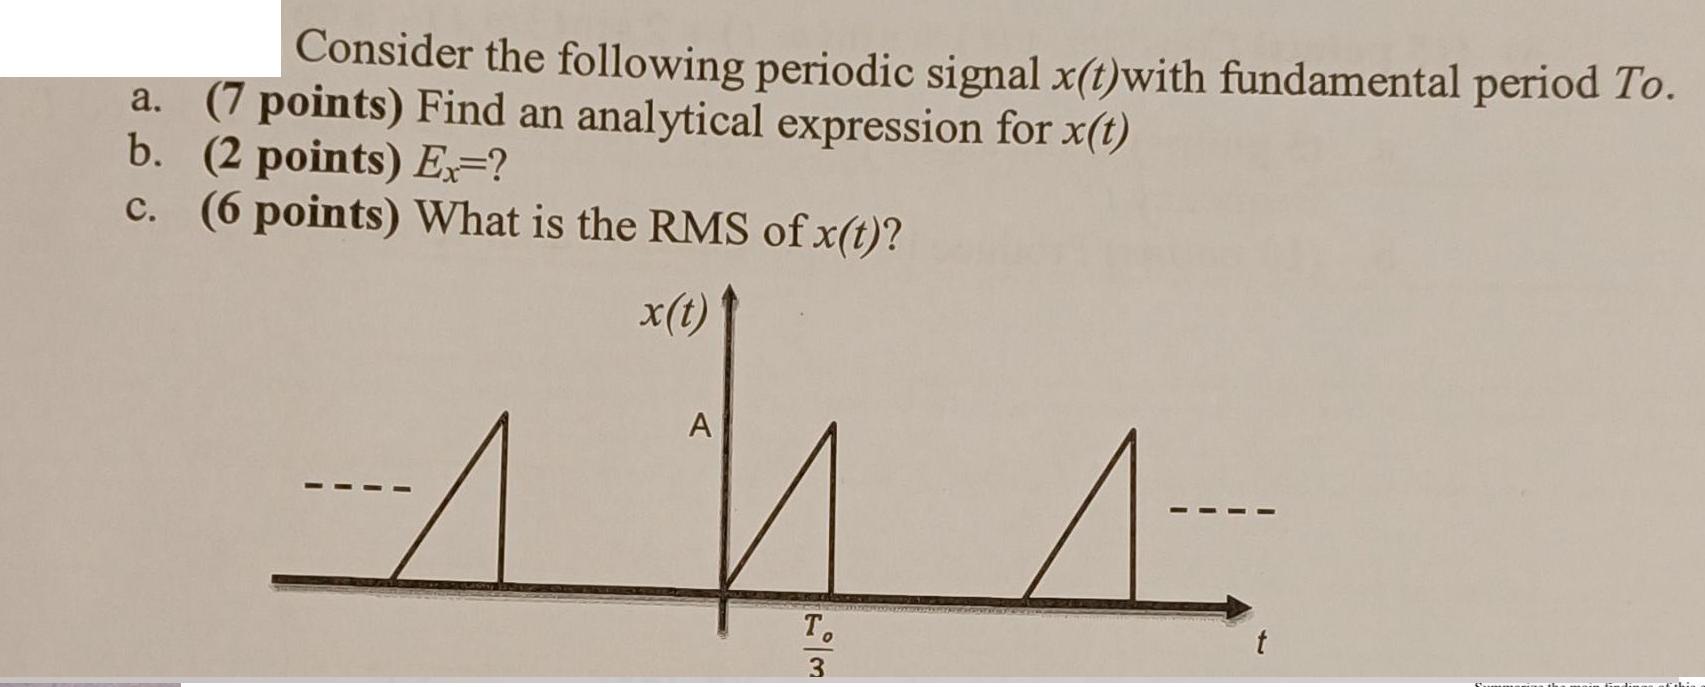 Consider the following periodic signal x(t)with fundamental period To. a. (7 points) Find an analytical